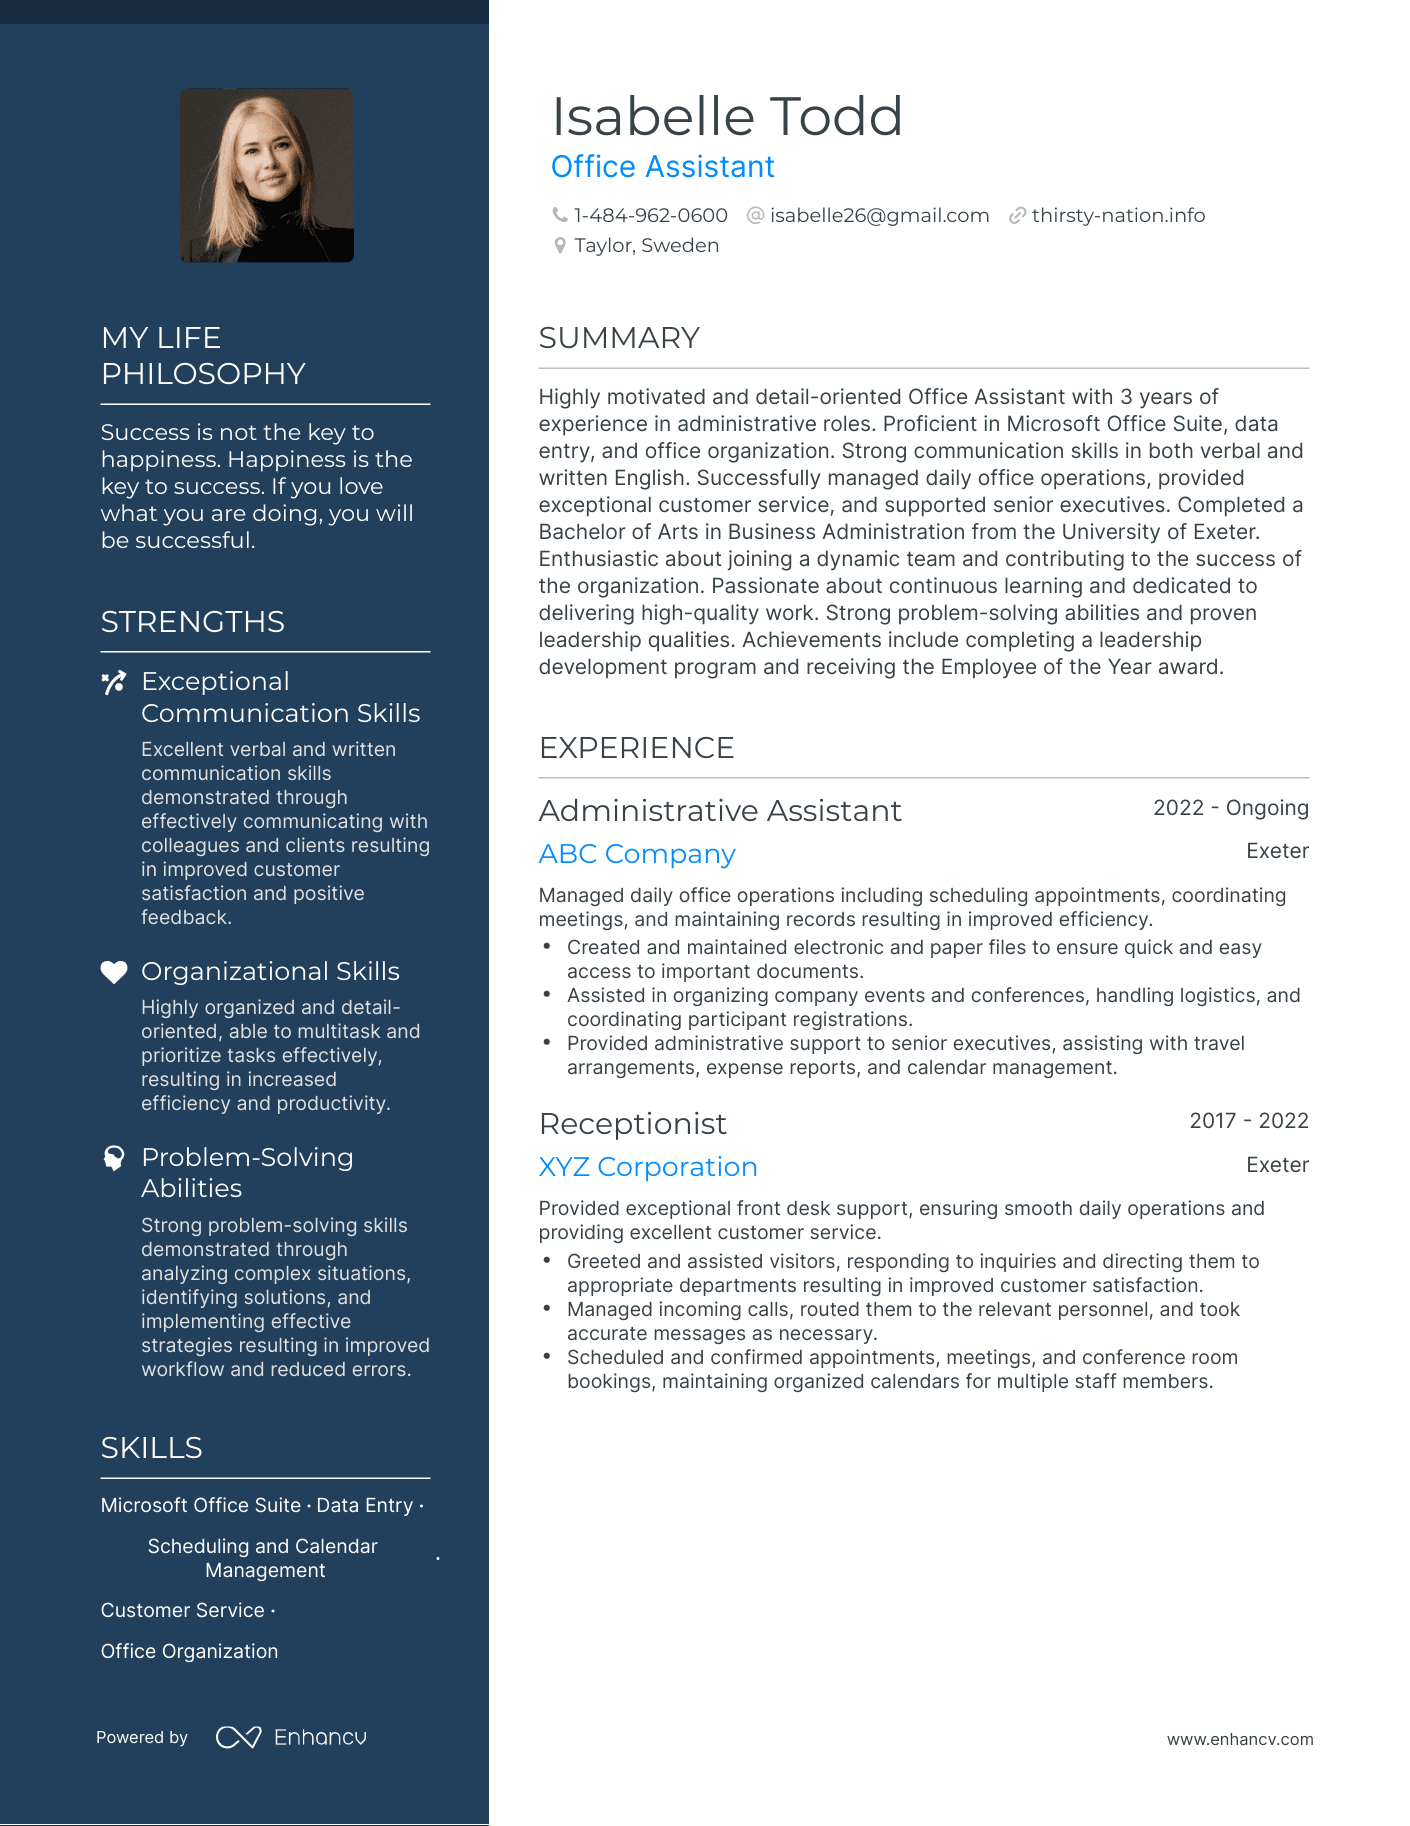 Office Assistant resume example